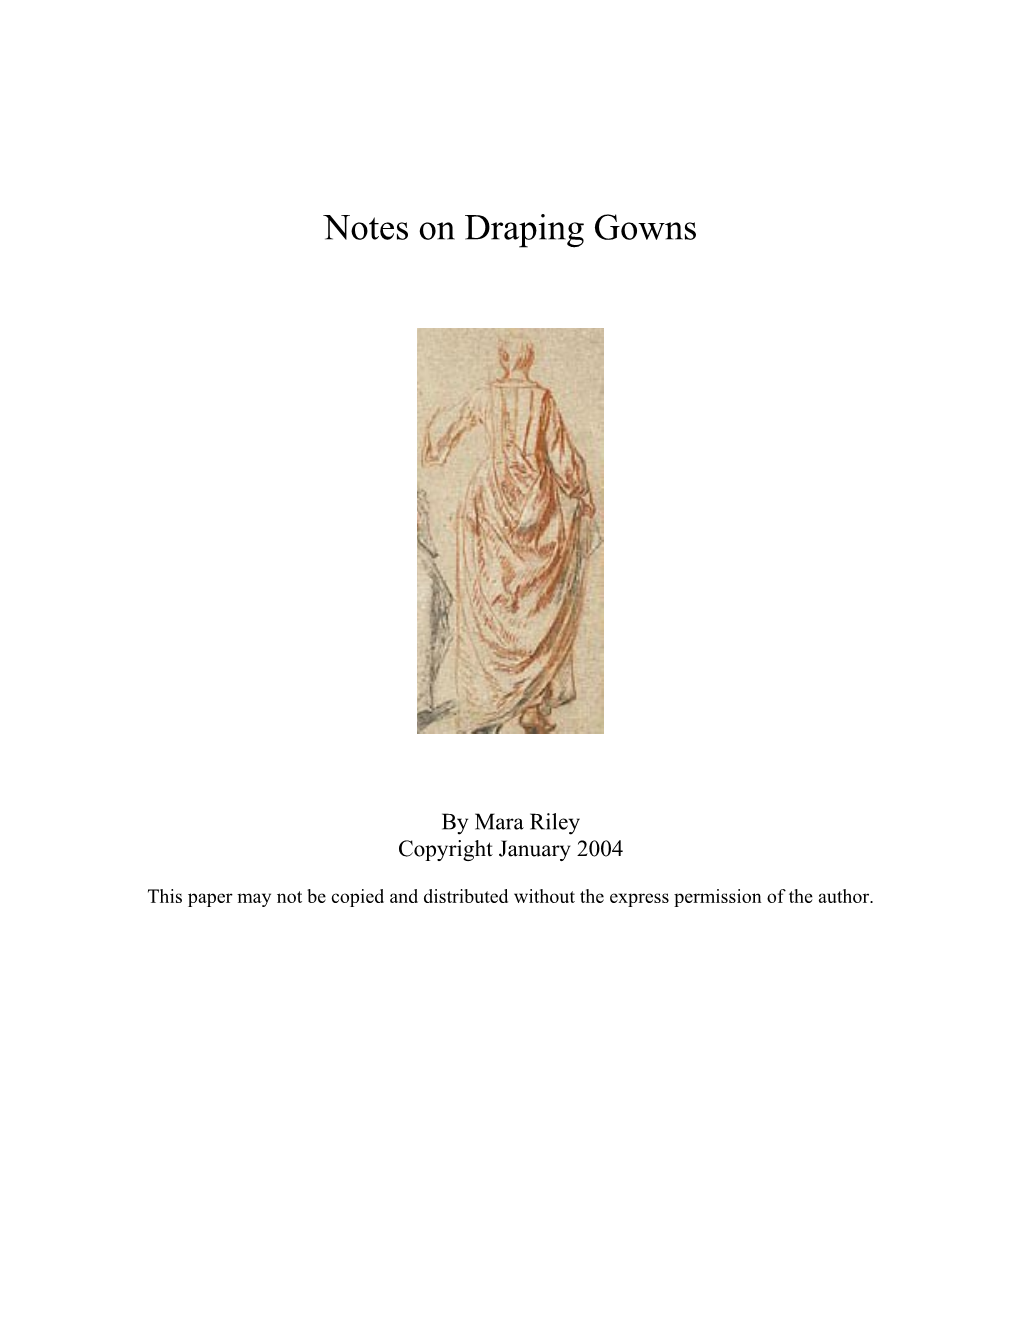 Notes on Draping Gowns (En Foirreau)